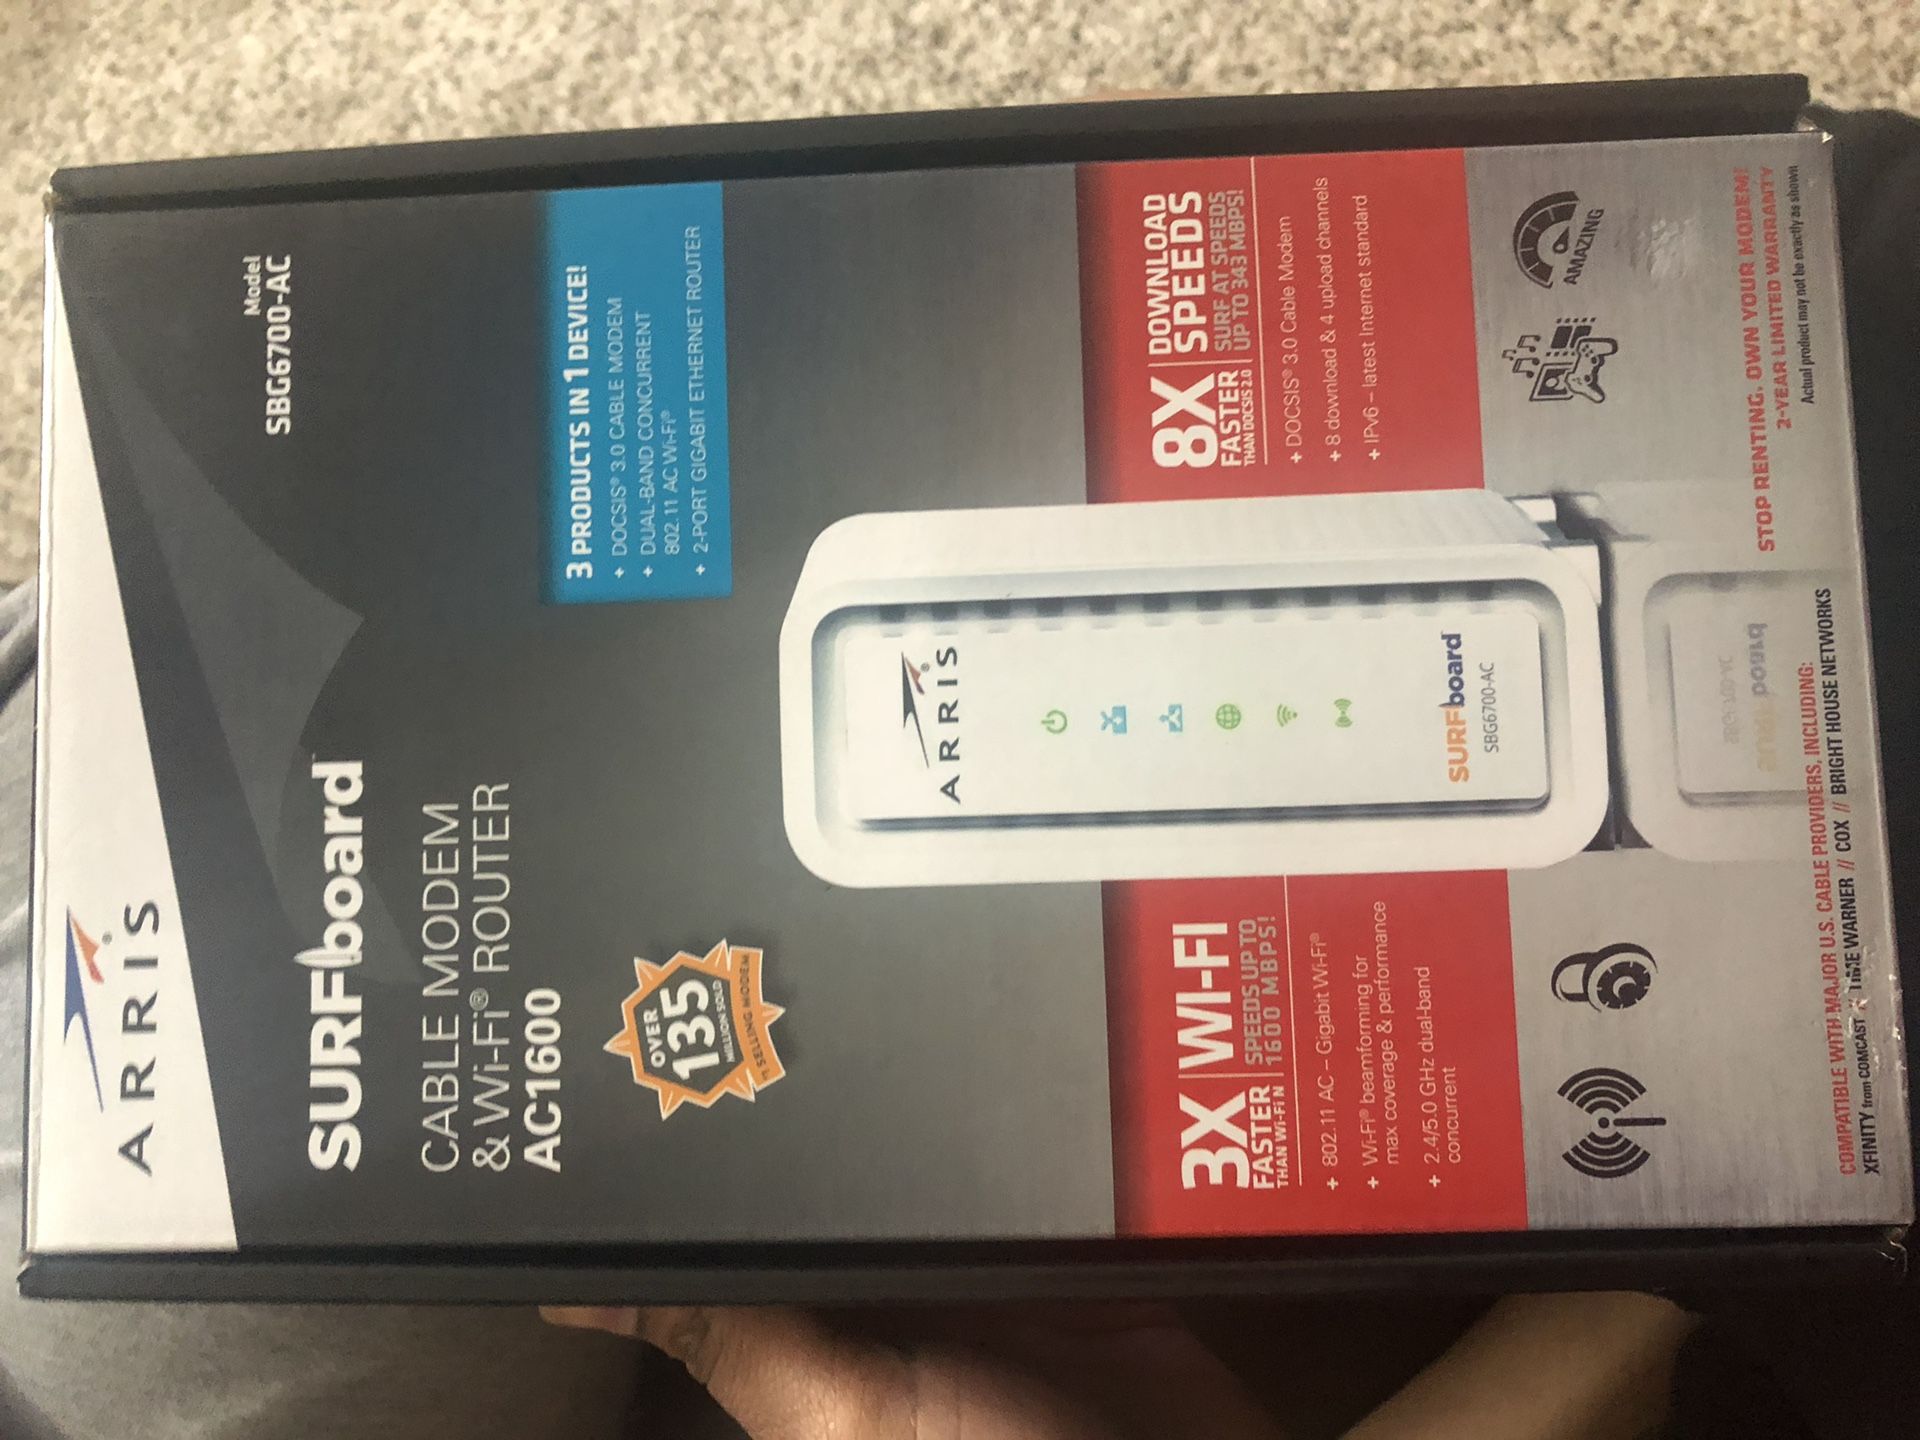 Arris surfboard cable modem &WiFi router